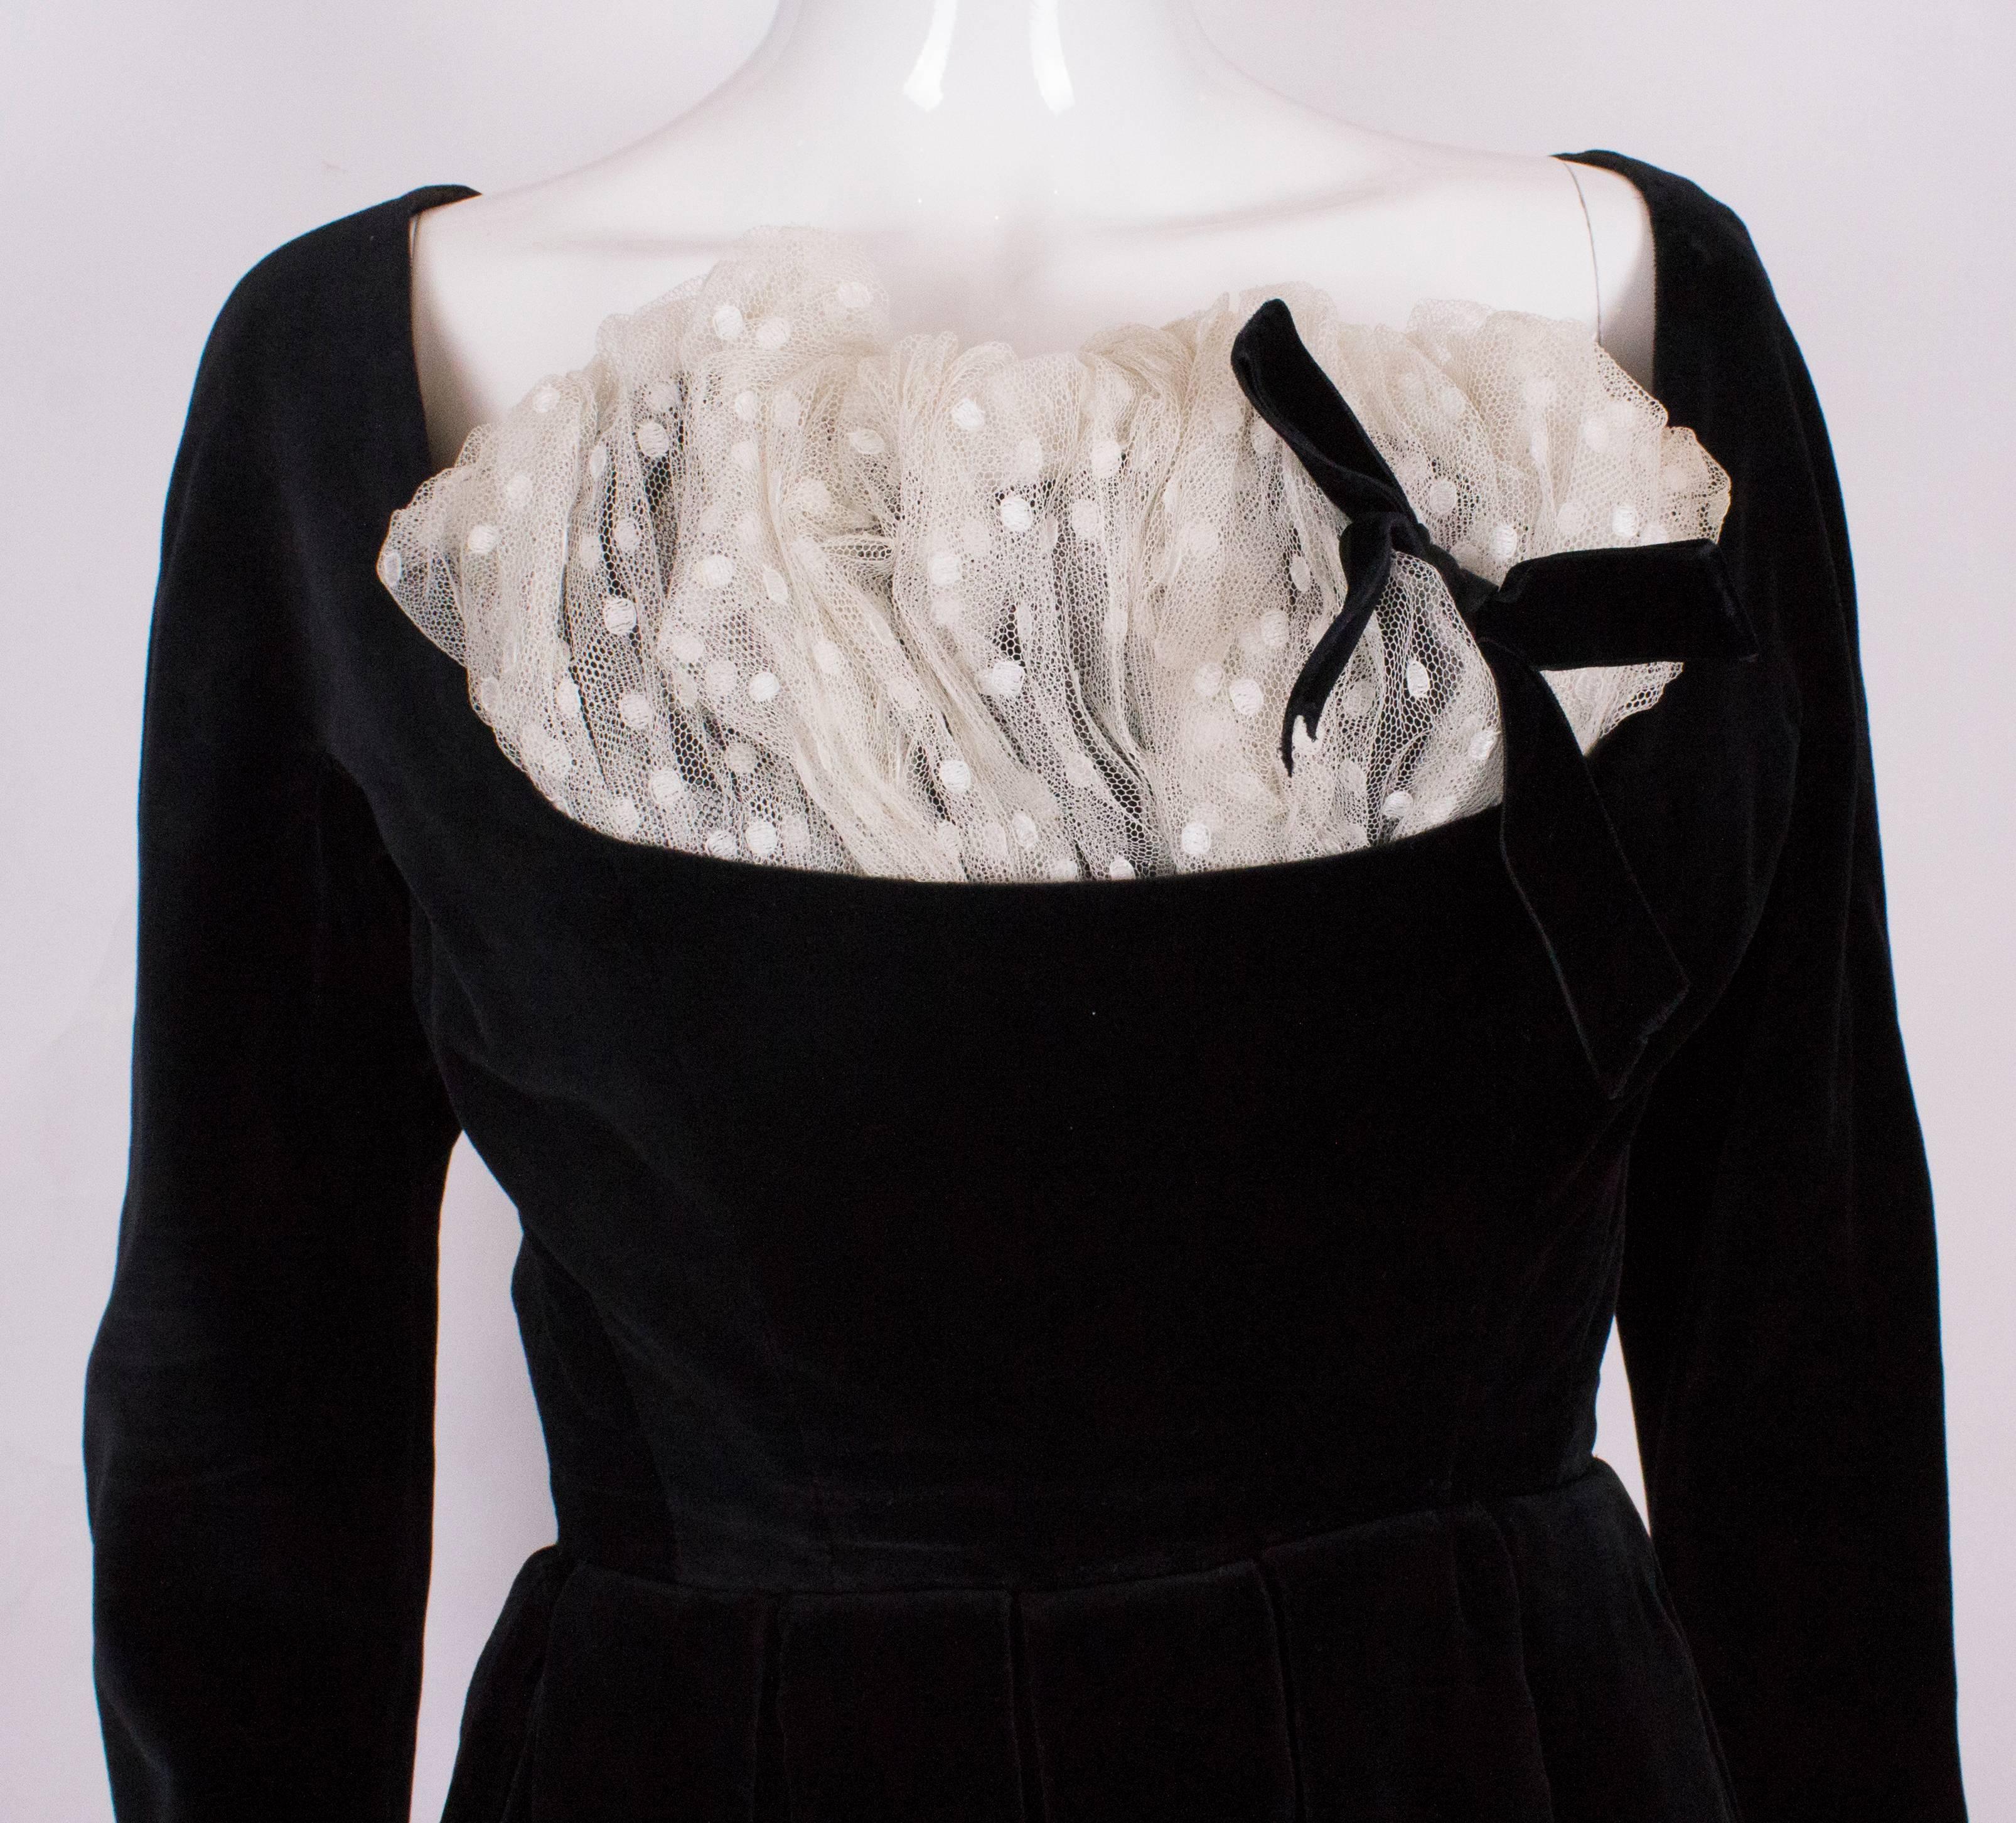 Women's A vintage 1950s Black velvet and lace cocktail dress Very Dior